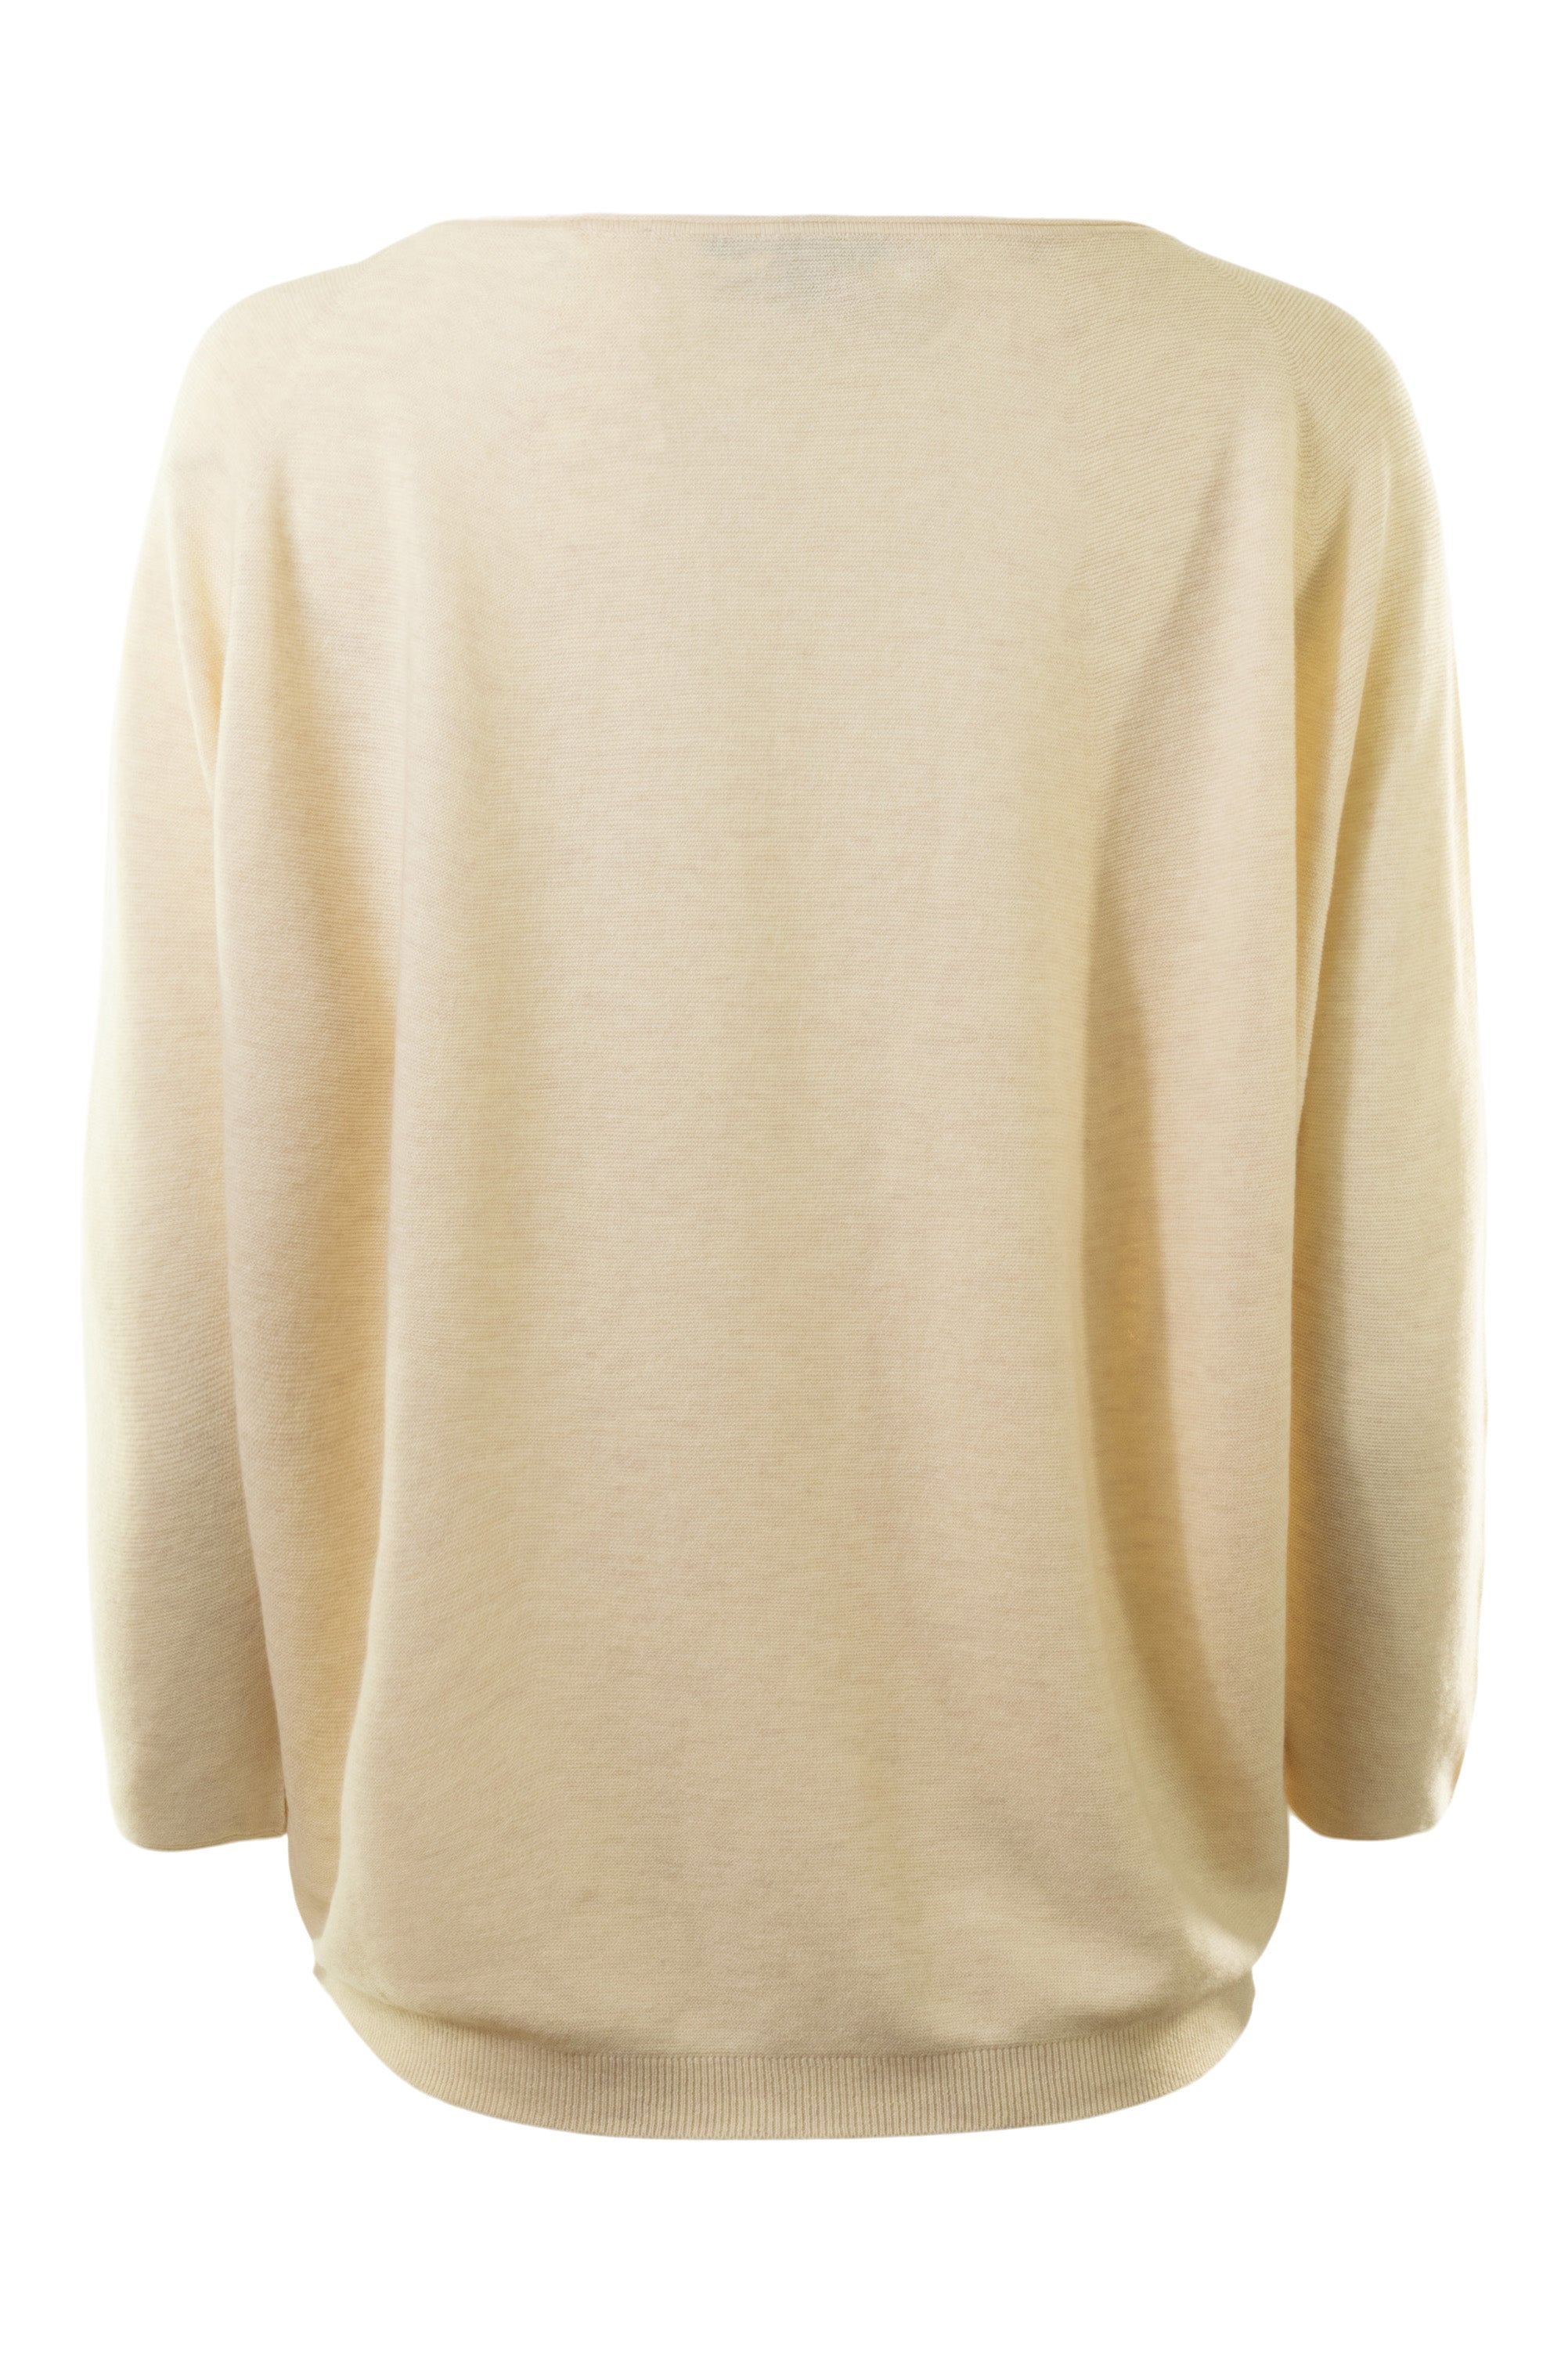 Repeat Cashmere Seamless Cotton Cashmere Sweater in Ivory